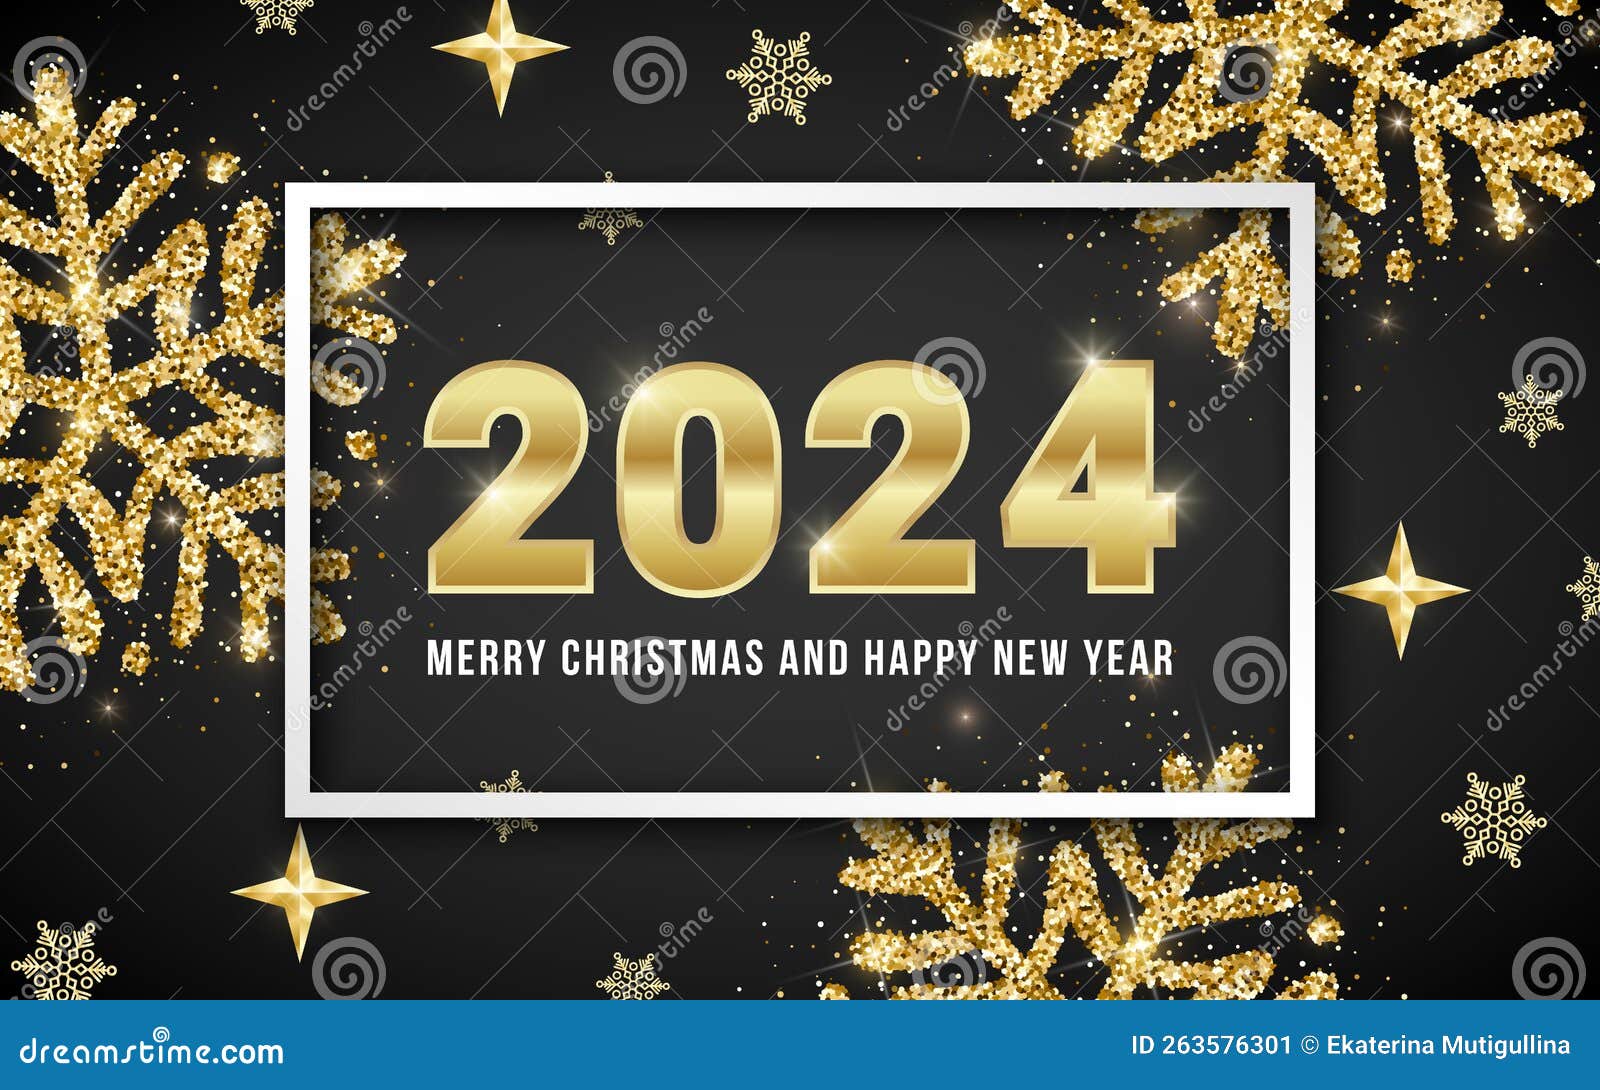 2024 Merry Christmas and Happy New Year Greeting Card Design with